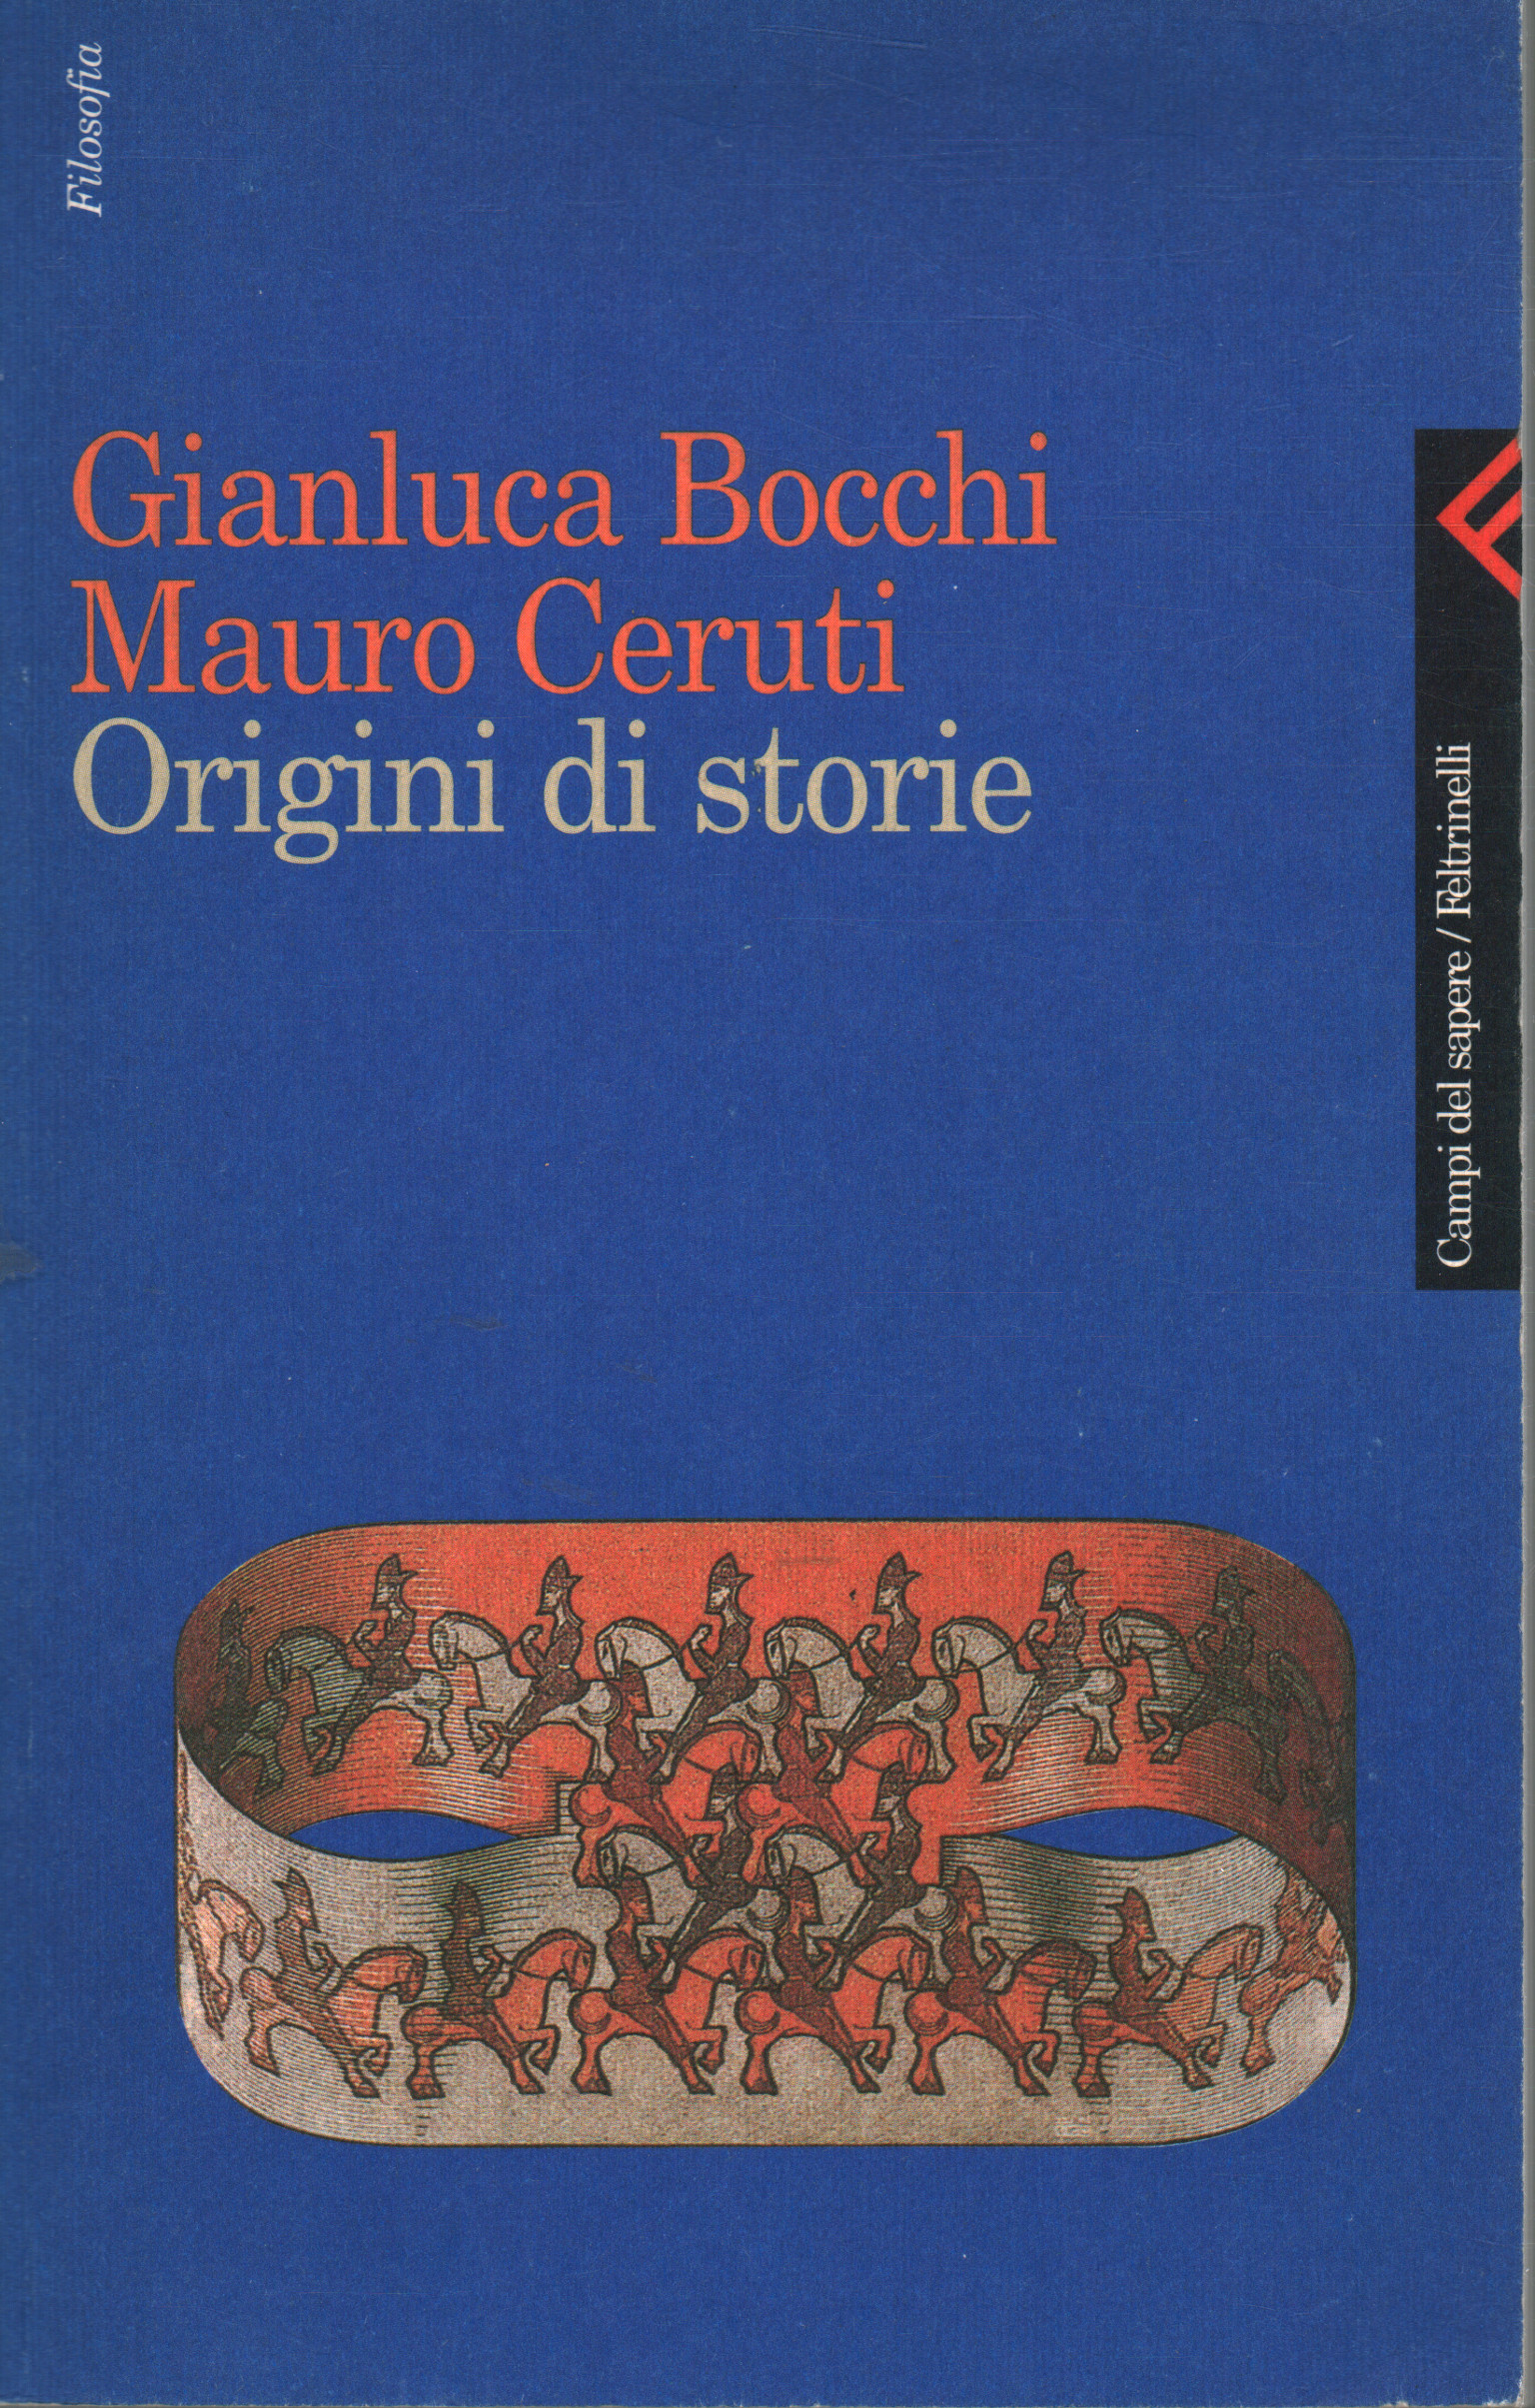 The origins of the stories, Gianluca Bocchi and Mauro Ceruti